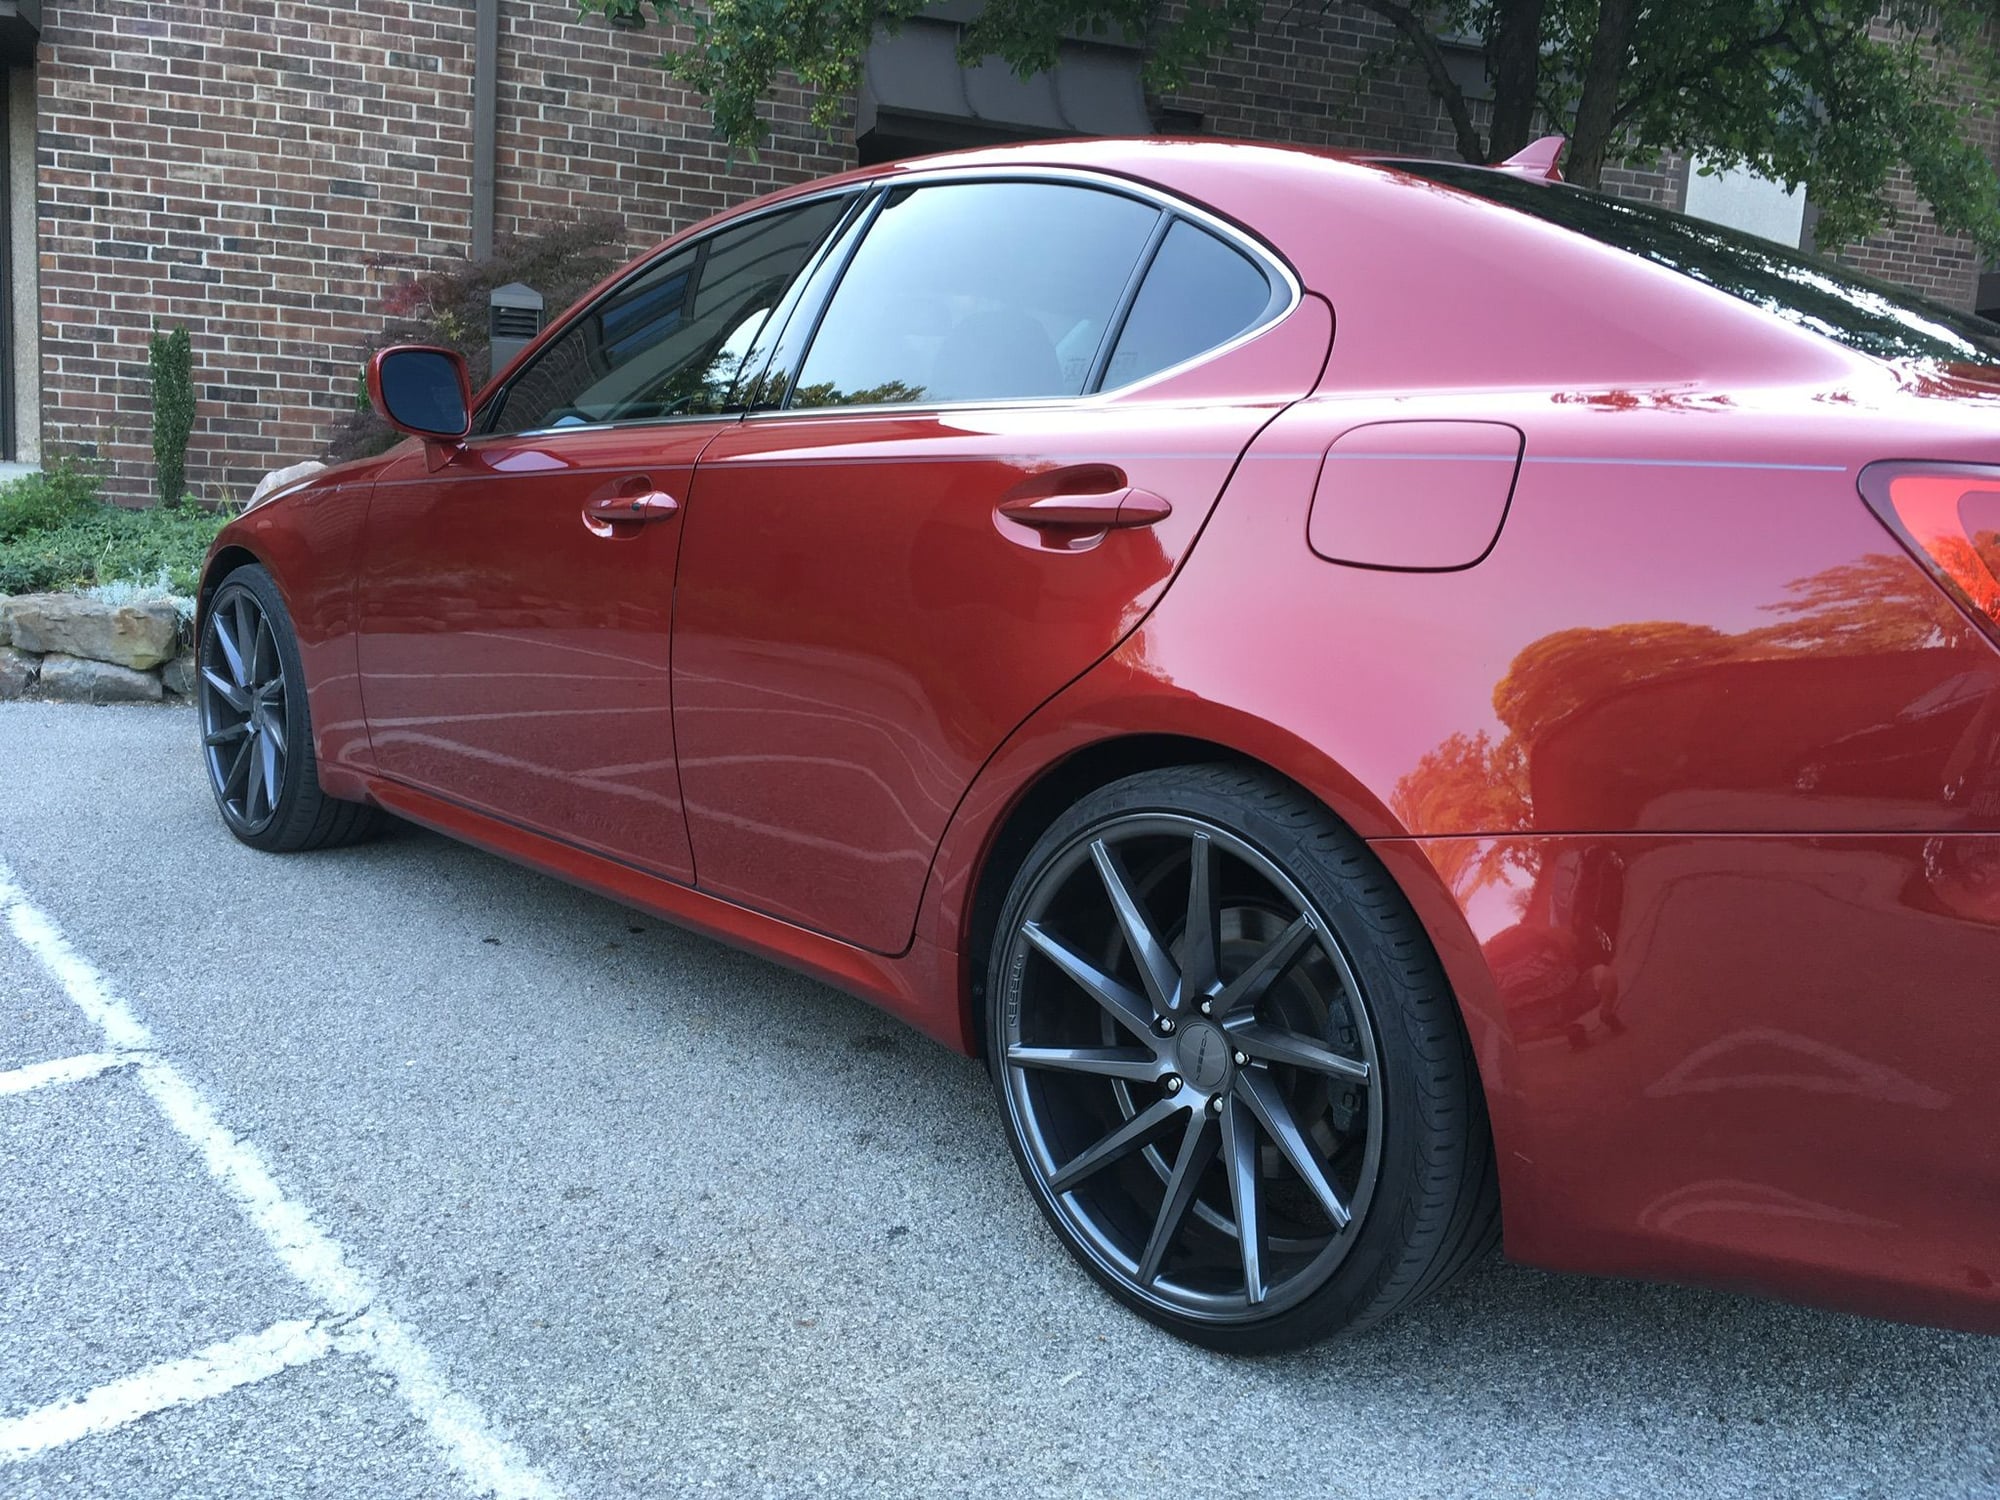 2008 Lexus IS350 - 08 IS350 Low Miles - Used - VIN JTHBE262985019187 - 48,000 Miles - 6 cyl - 2WD - Automatic - Sedan - Red - Indianapolis, IN 46228, United States